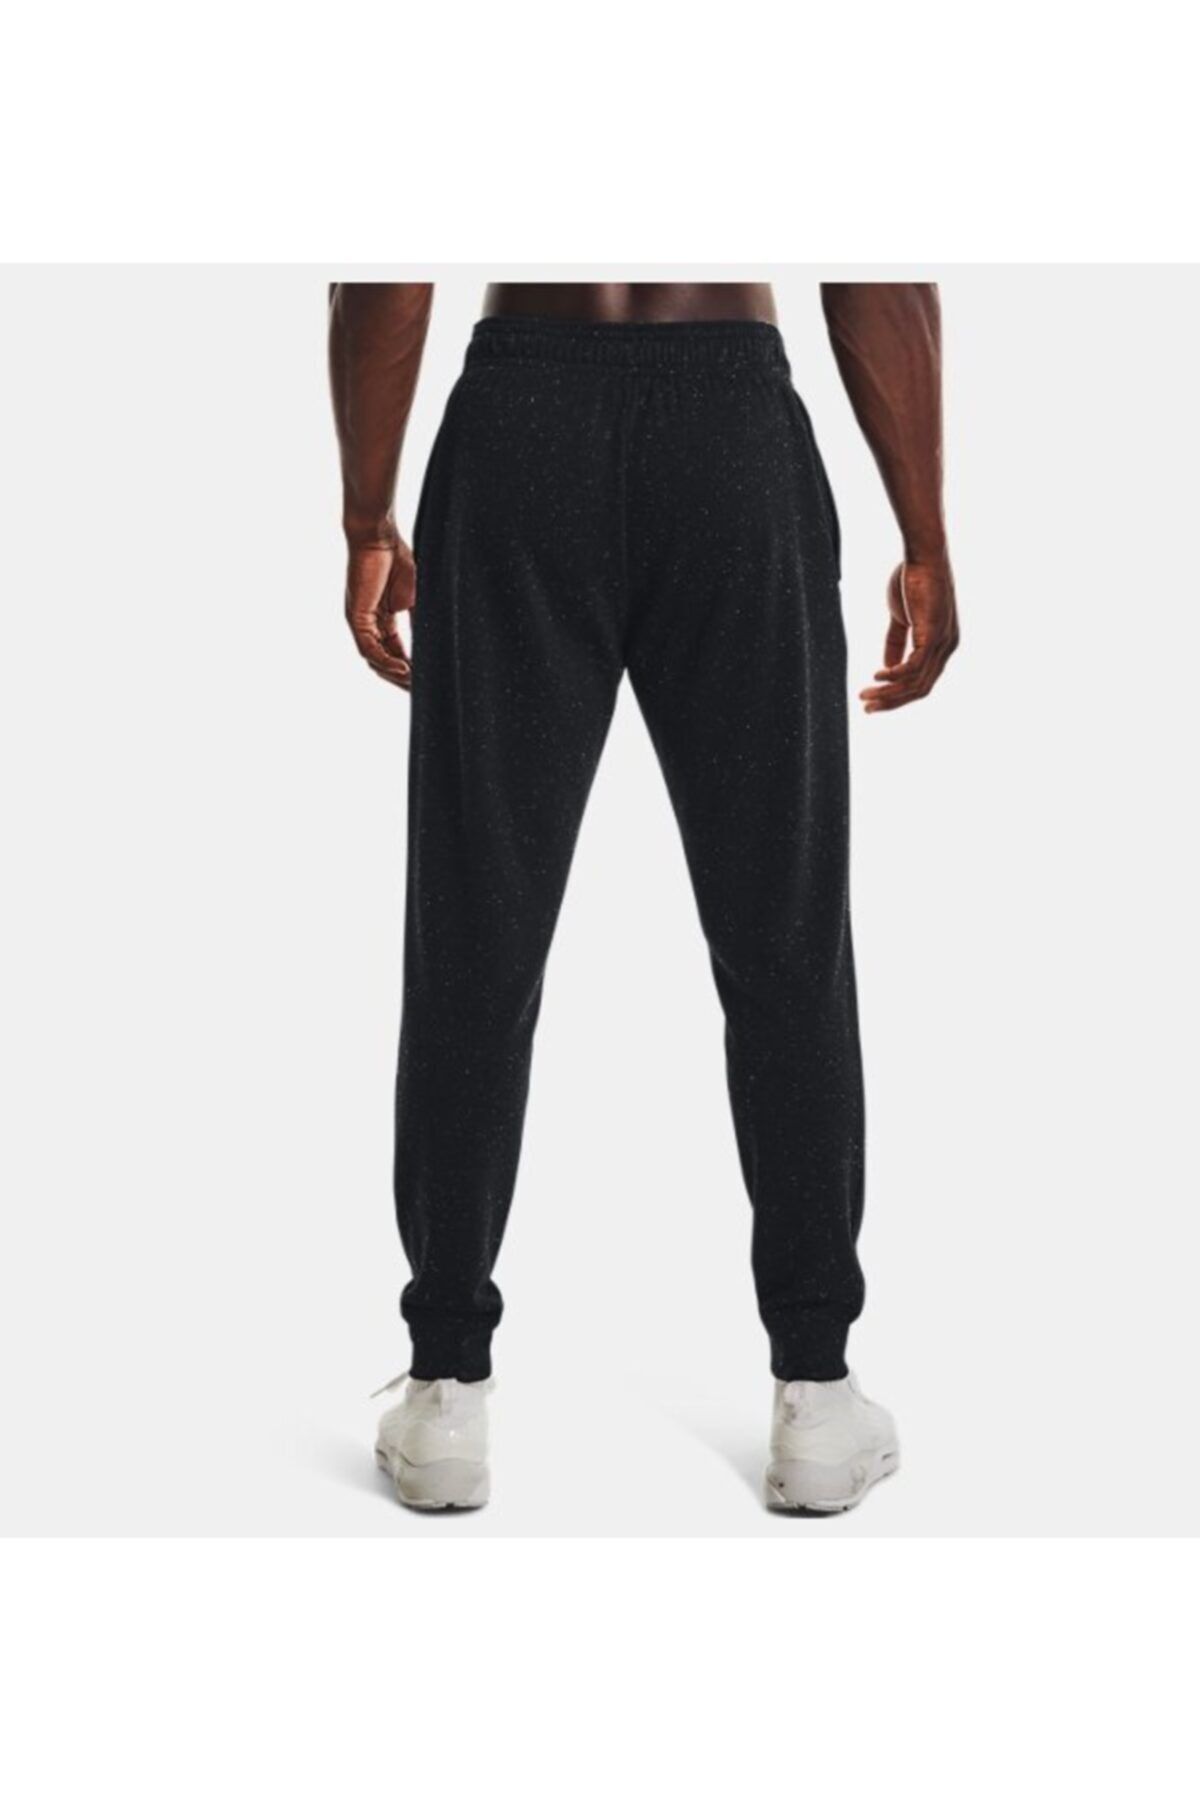 UNDER ARMOR JOGGER PANTS M'S RIVAL TERRY ATL DEPT 1370357